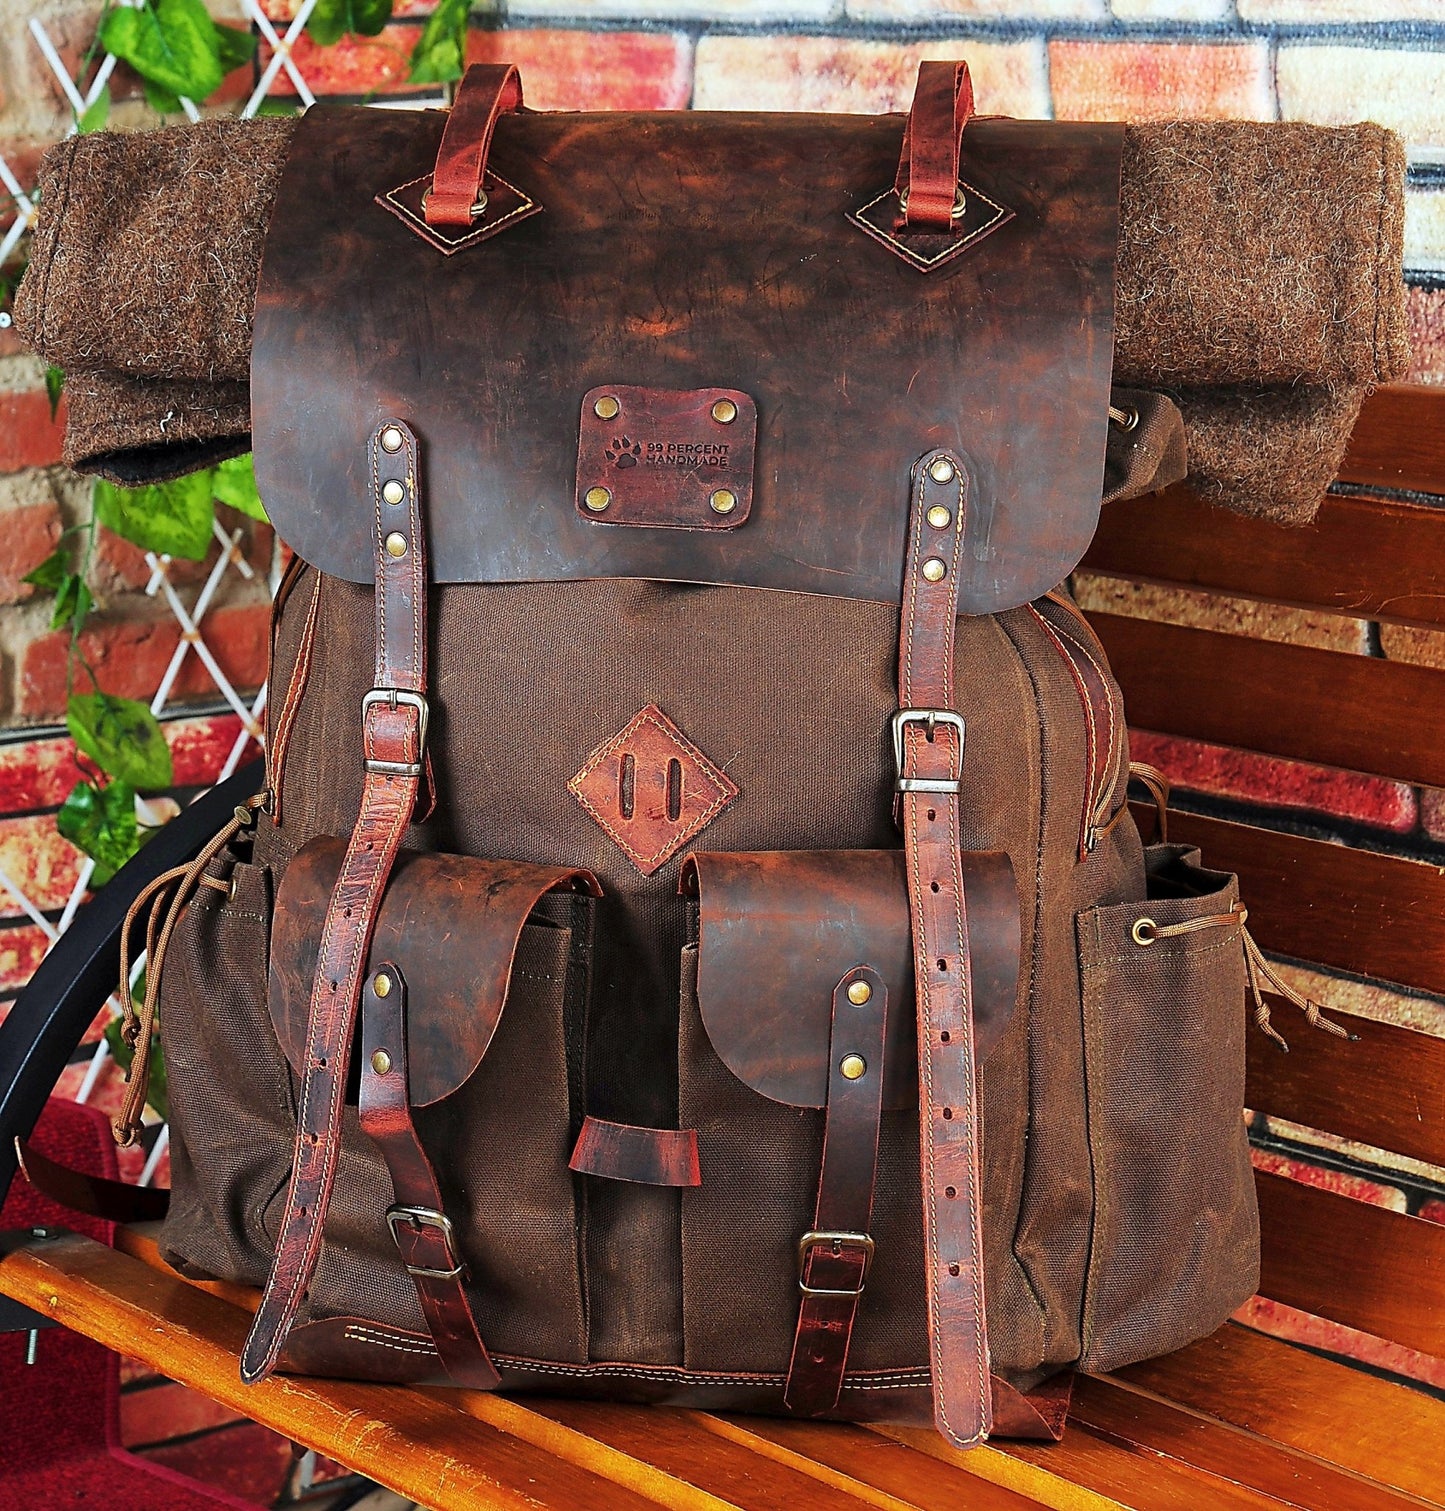 Hiking Backpack | Camping Backpack | Buschraft Backpack | Extra large | Leather | Canvas Backpack | Camping, Hunting, Bushcraft, Travel  99percenthandmade   